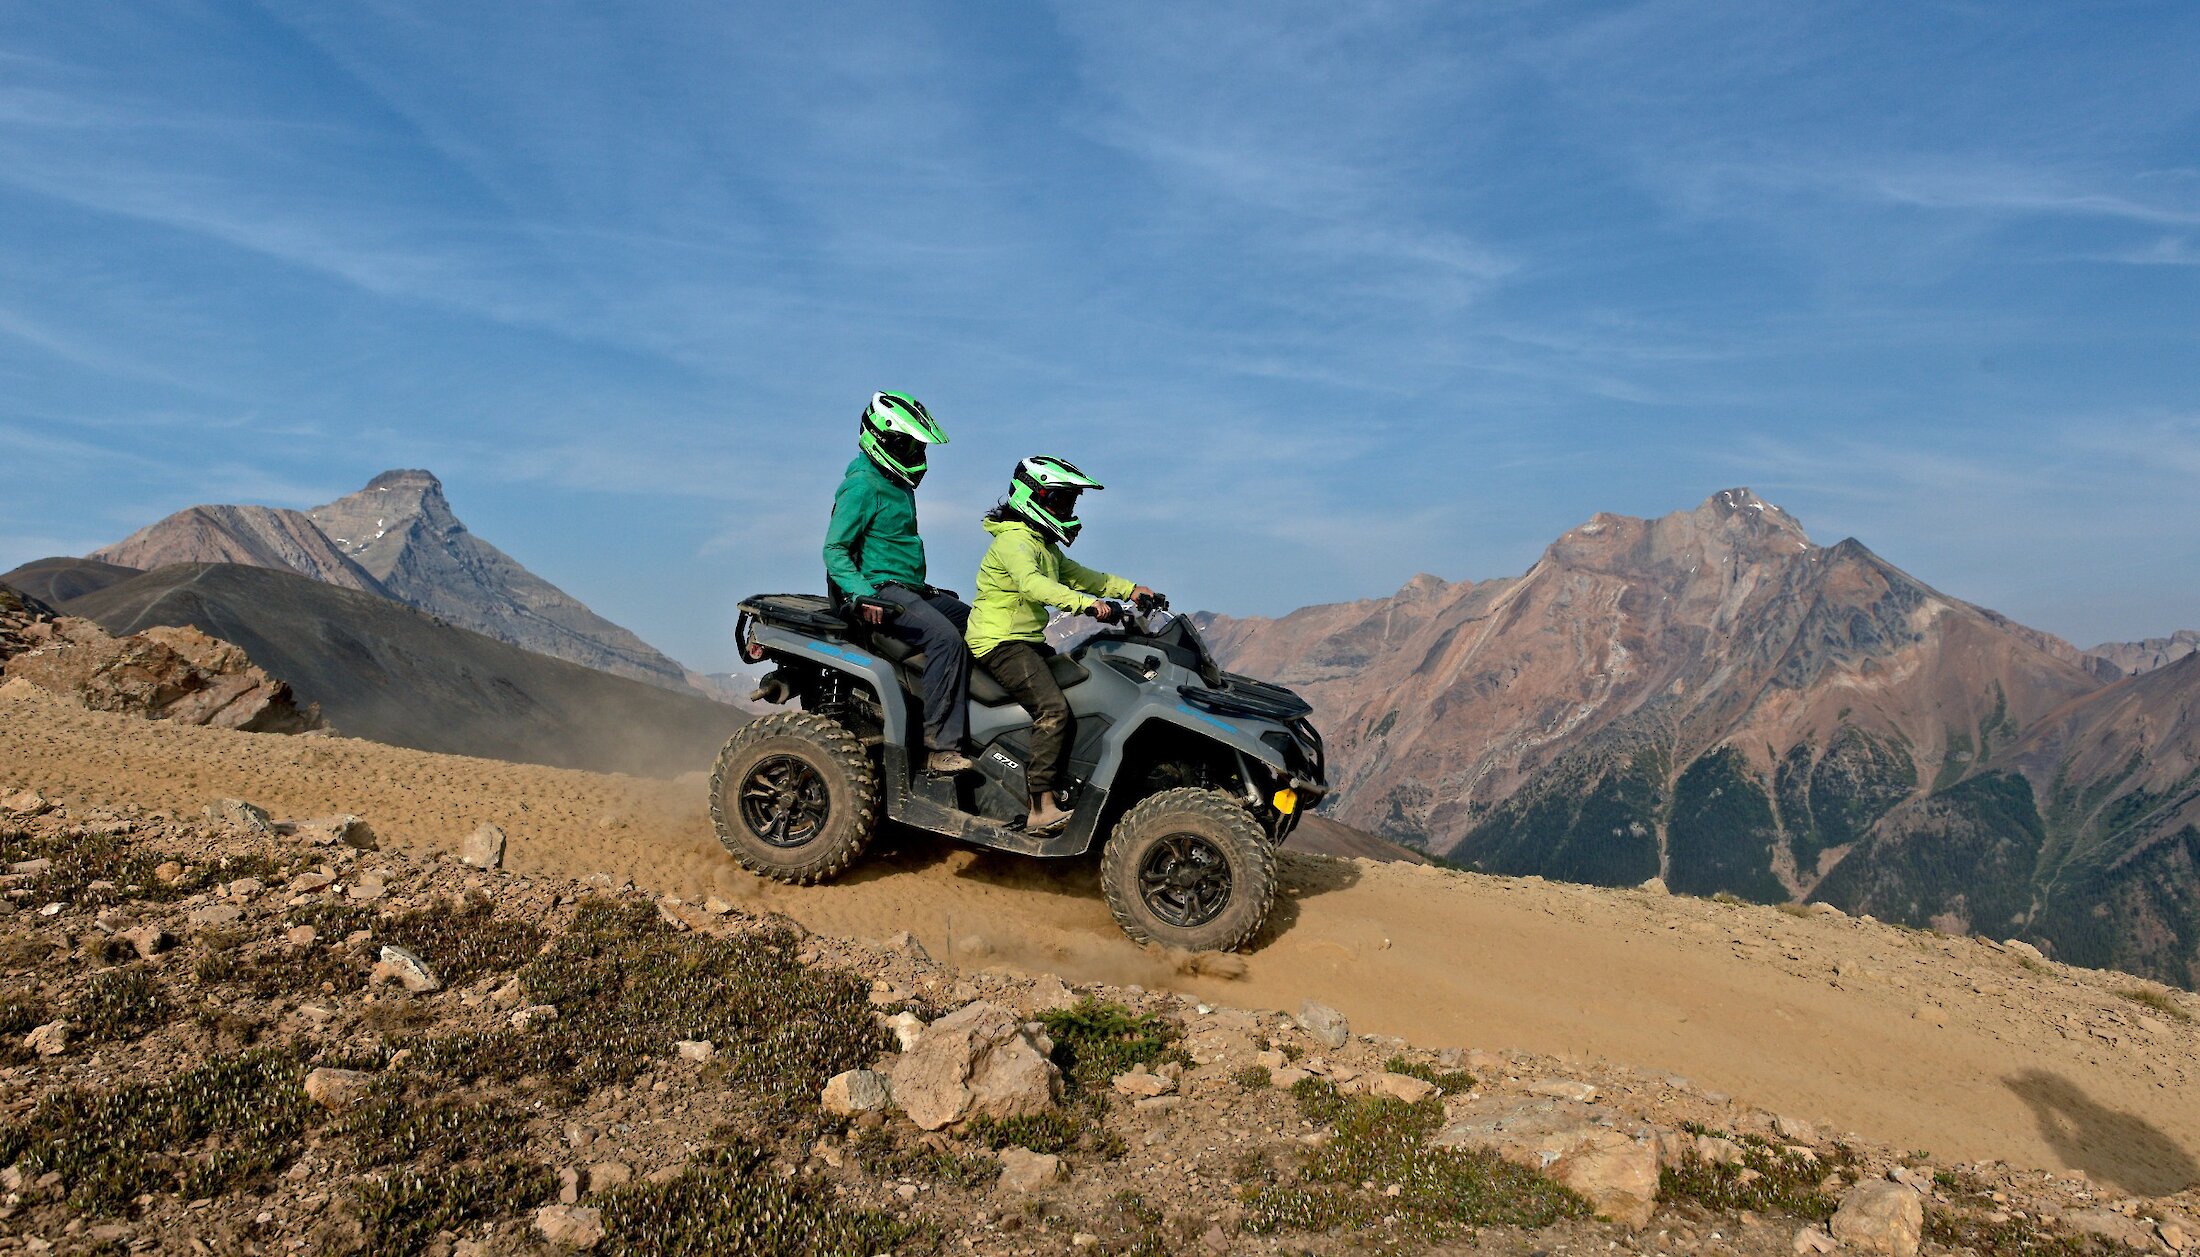 Heading down the ATV trails with passenger